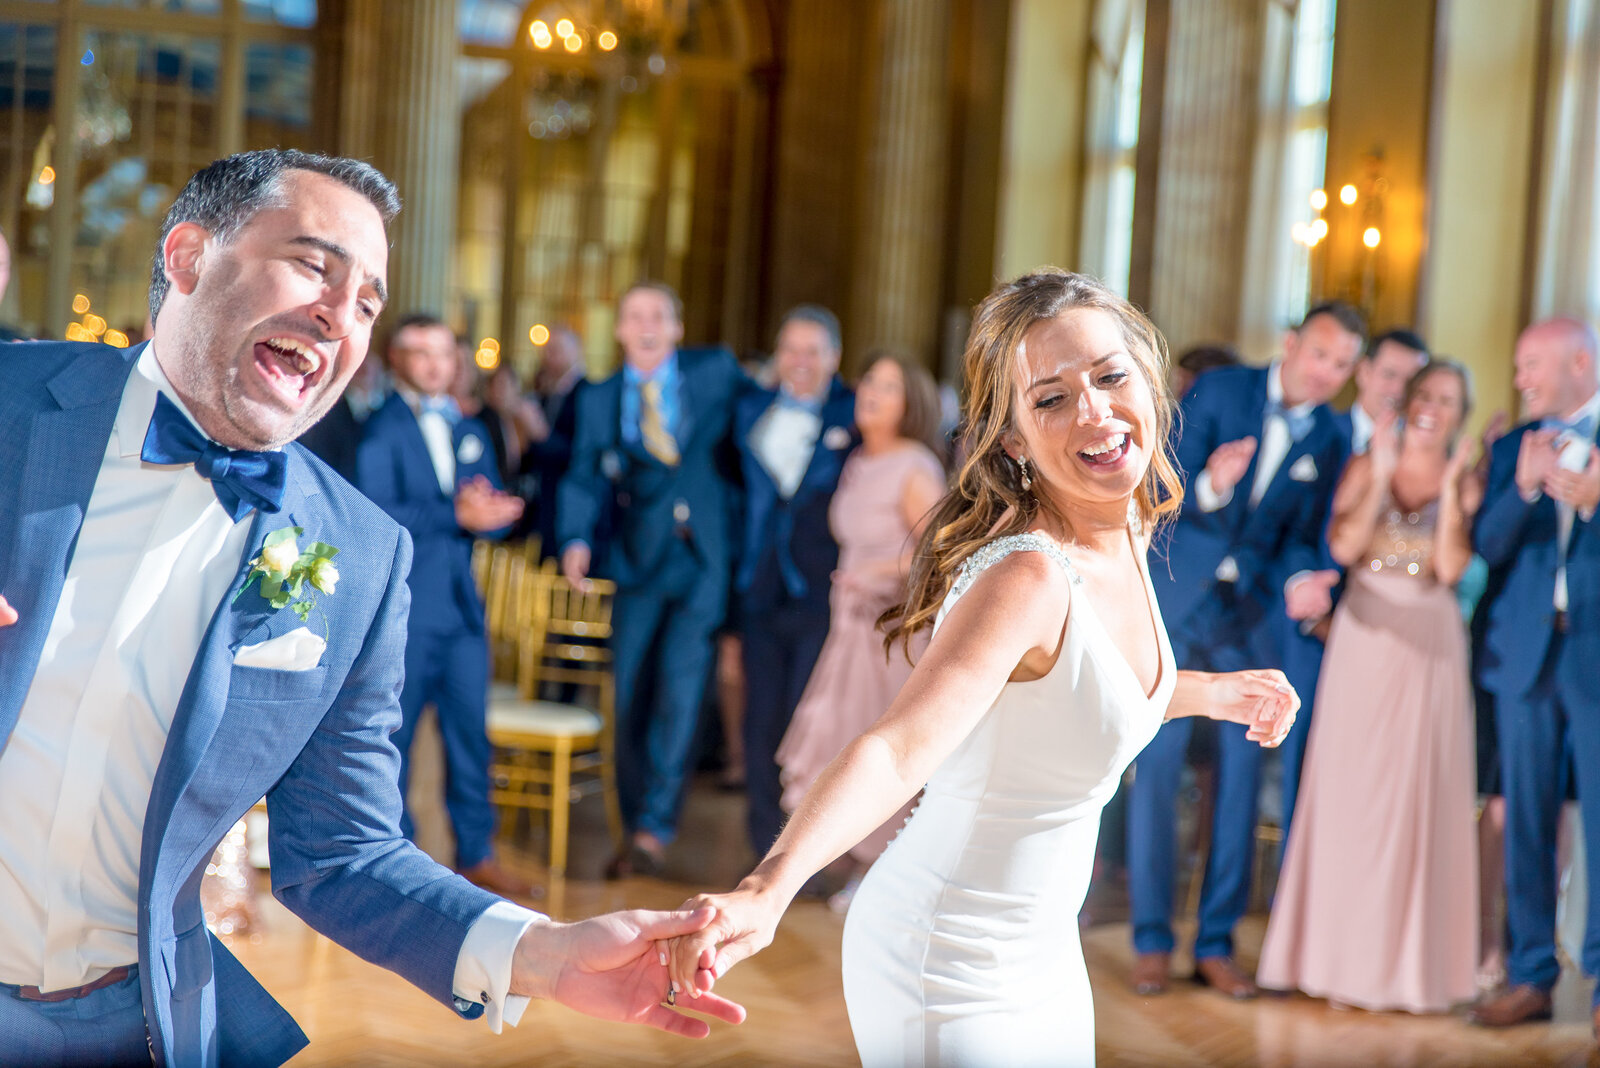 Bride and groom swing dance at their wedding at the Syracuse Marriott Downtown